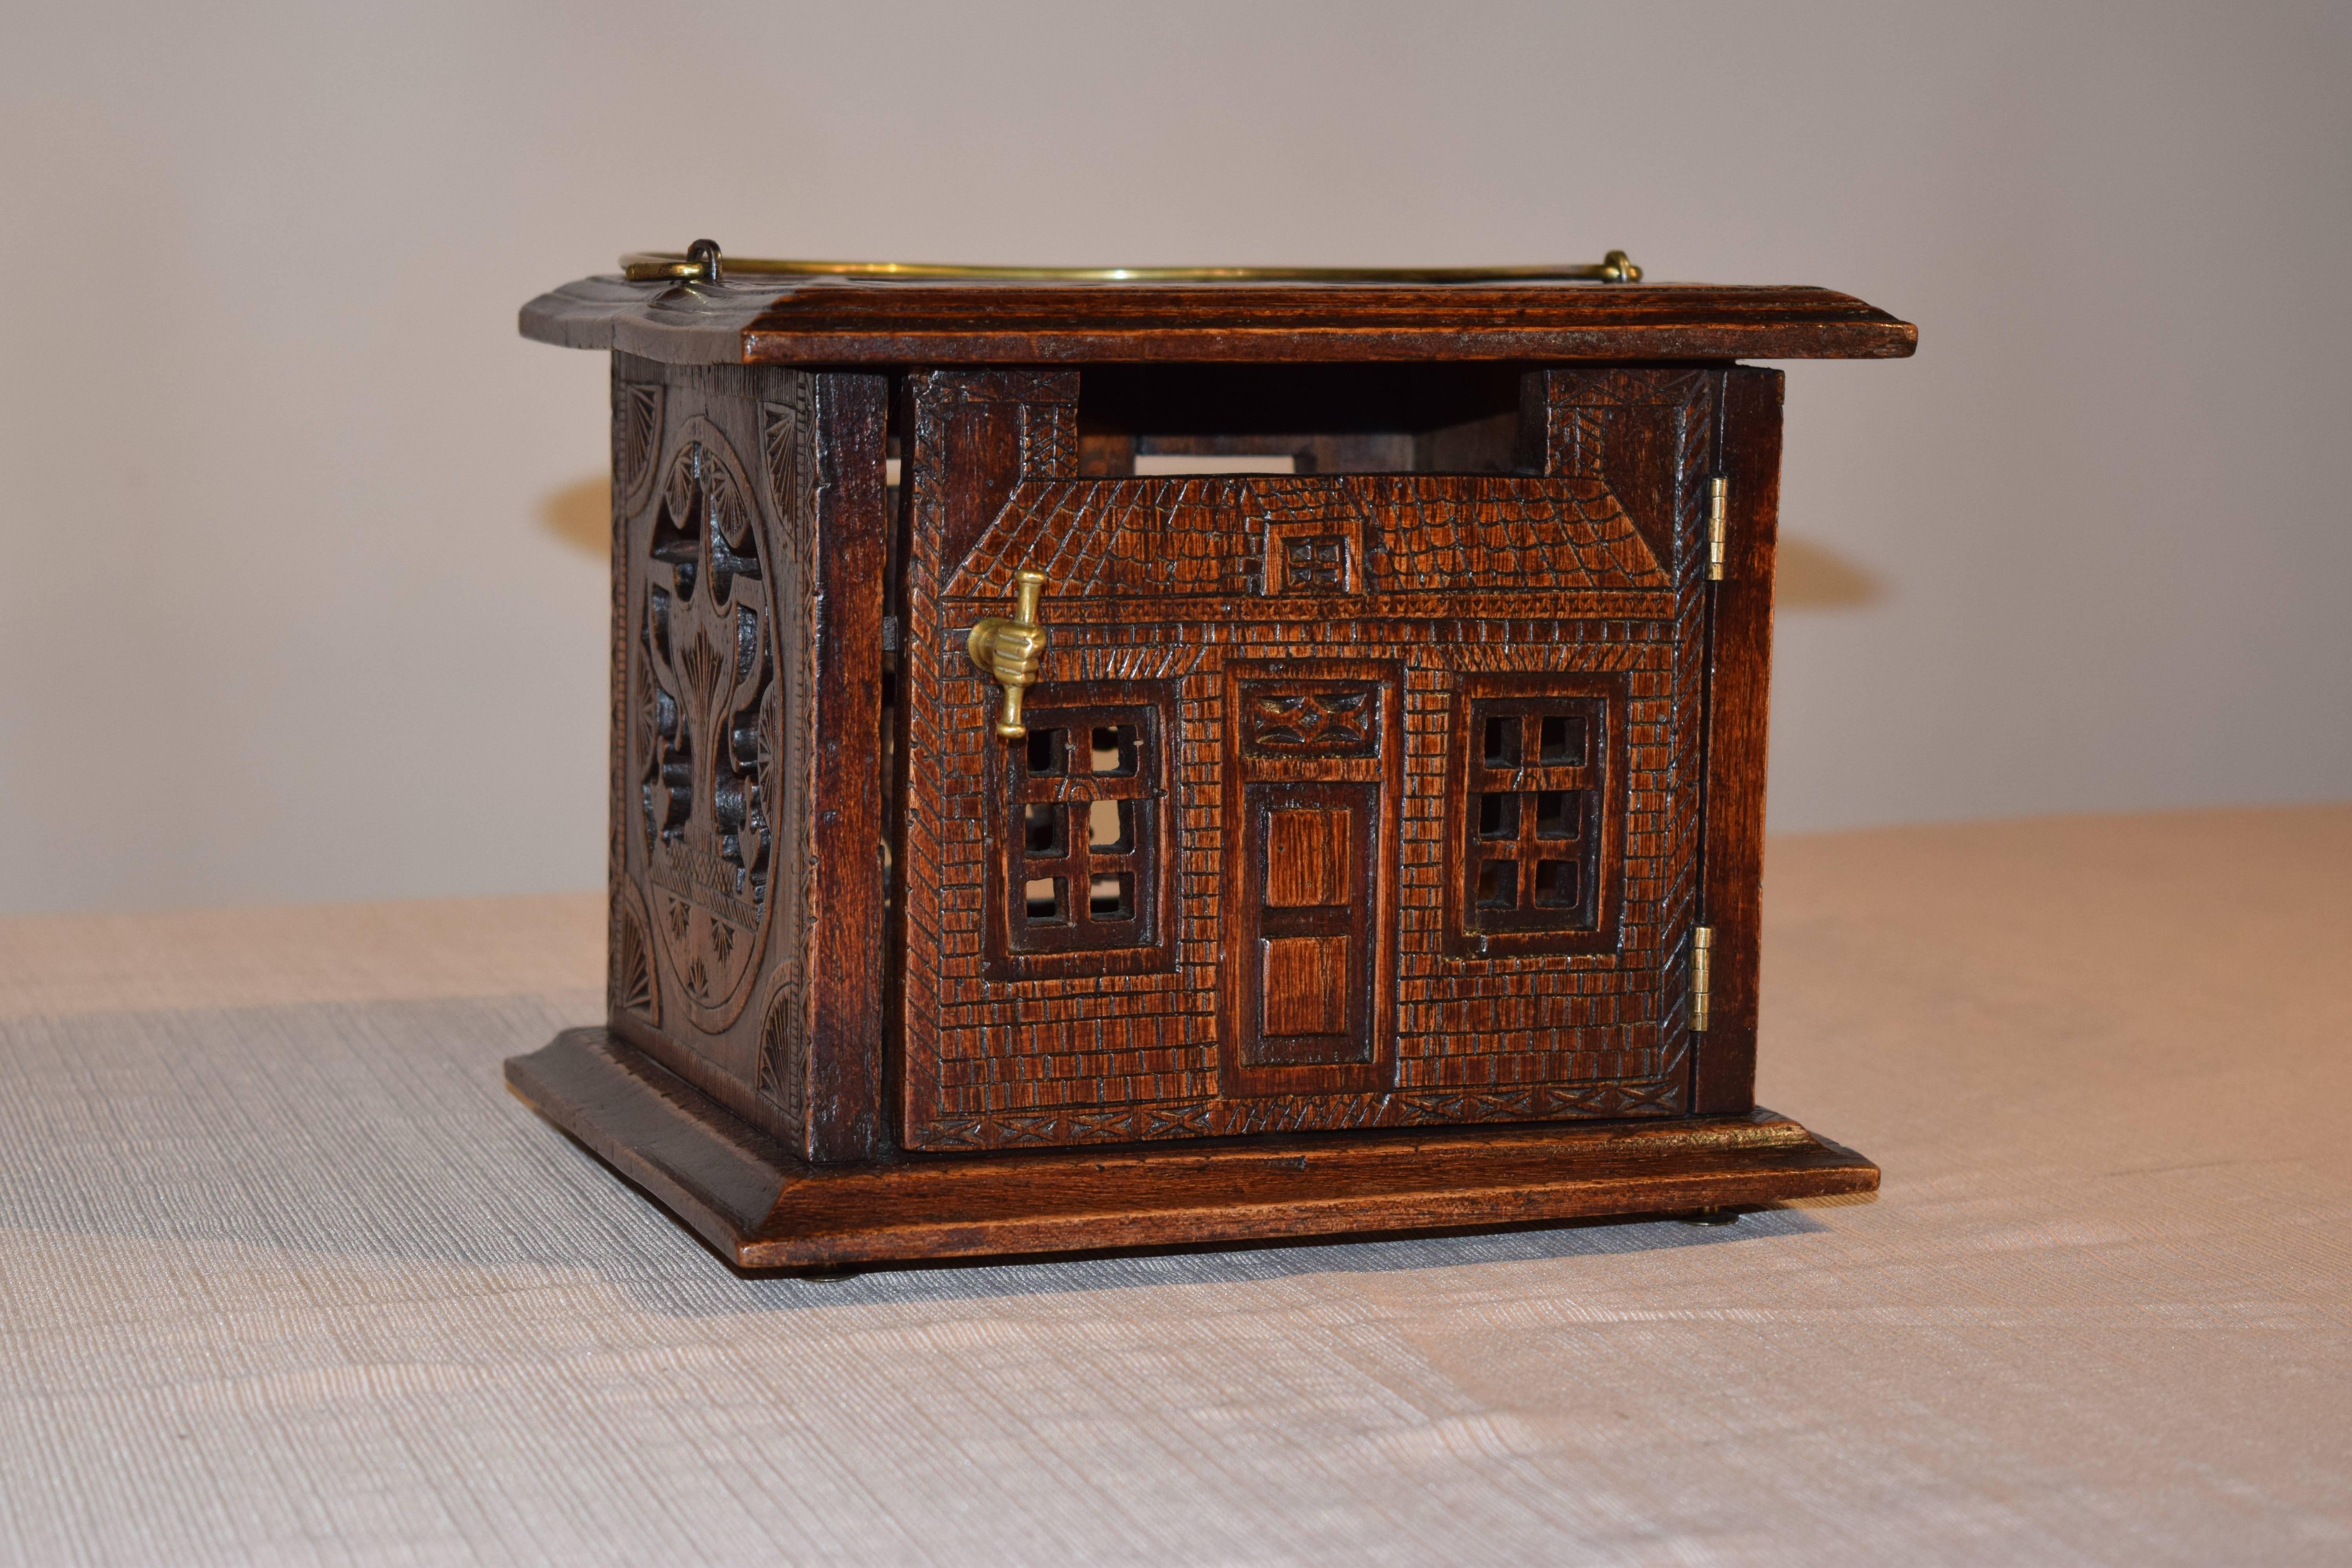 18th century English oak foot warmer with pierced and carved decoration on all sides. The top has a molded edge and is banded with carving surrounding a central pierced medallion. The front looks like a house with a front entrance and hand a scroll